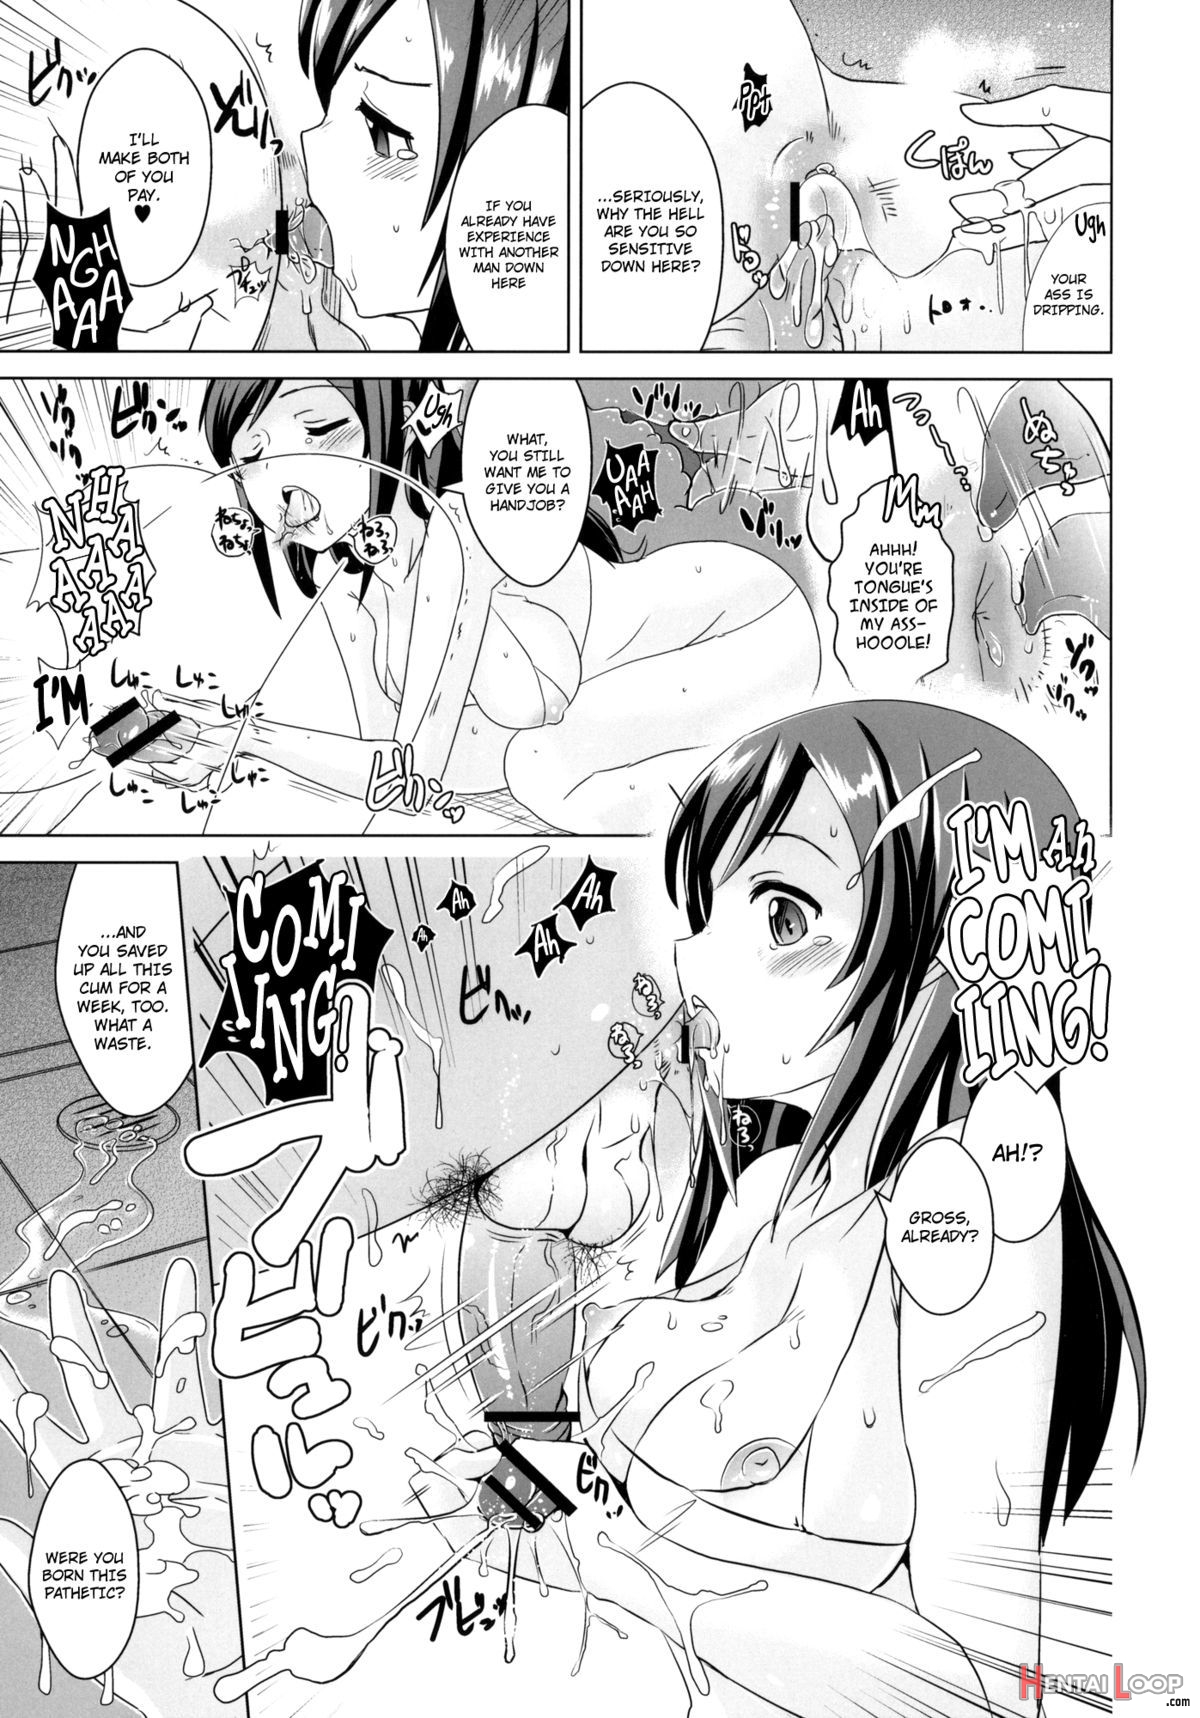 Mistress Ayase Killed The Fat Pig + Paper page 8